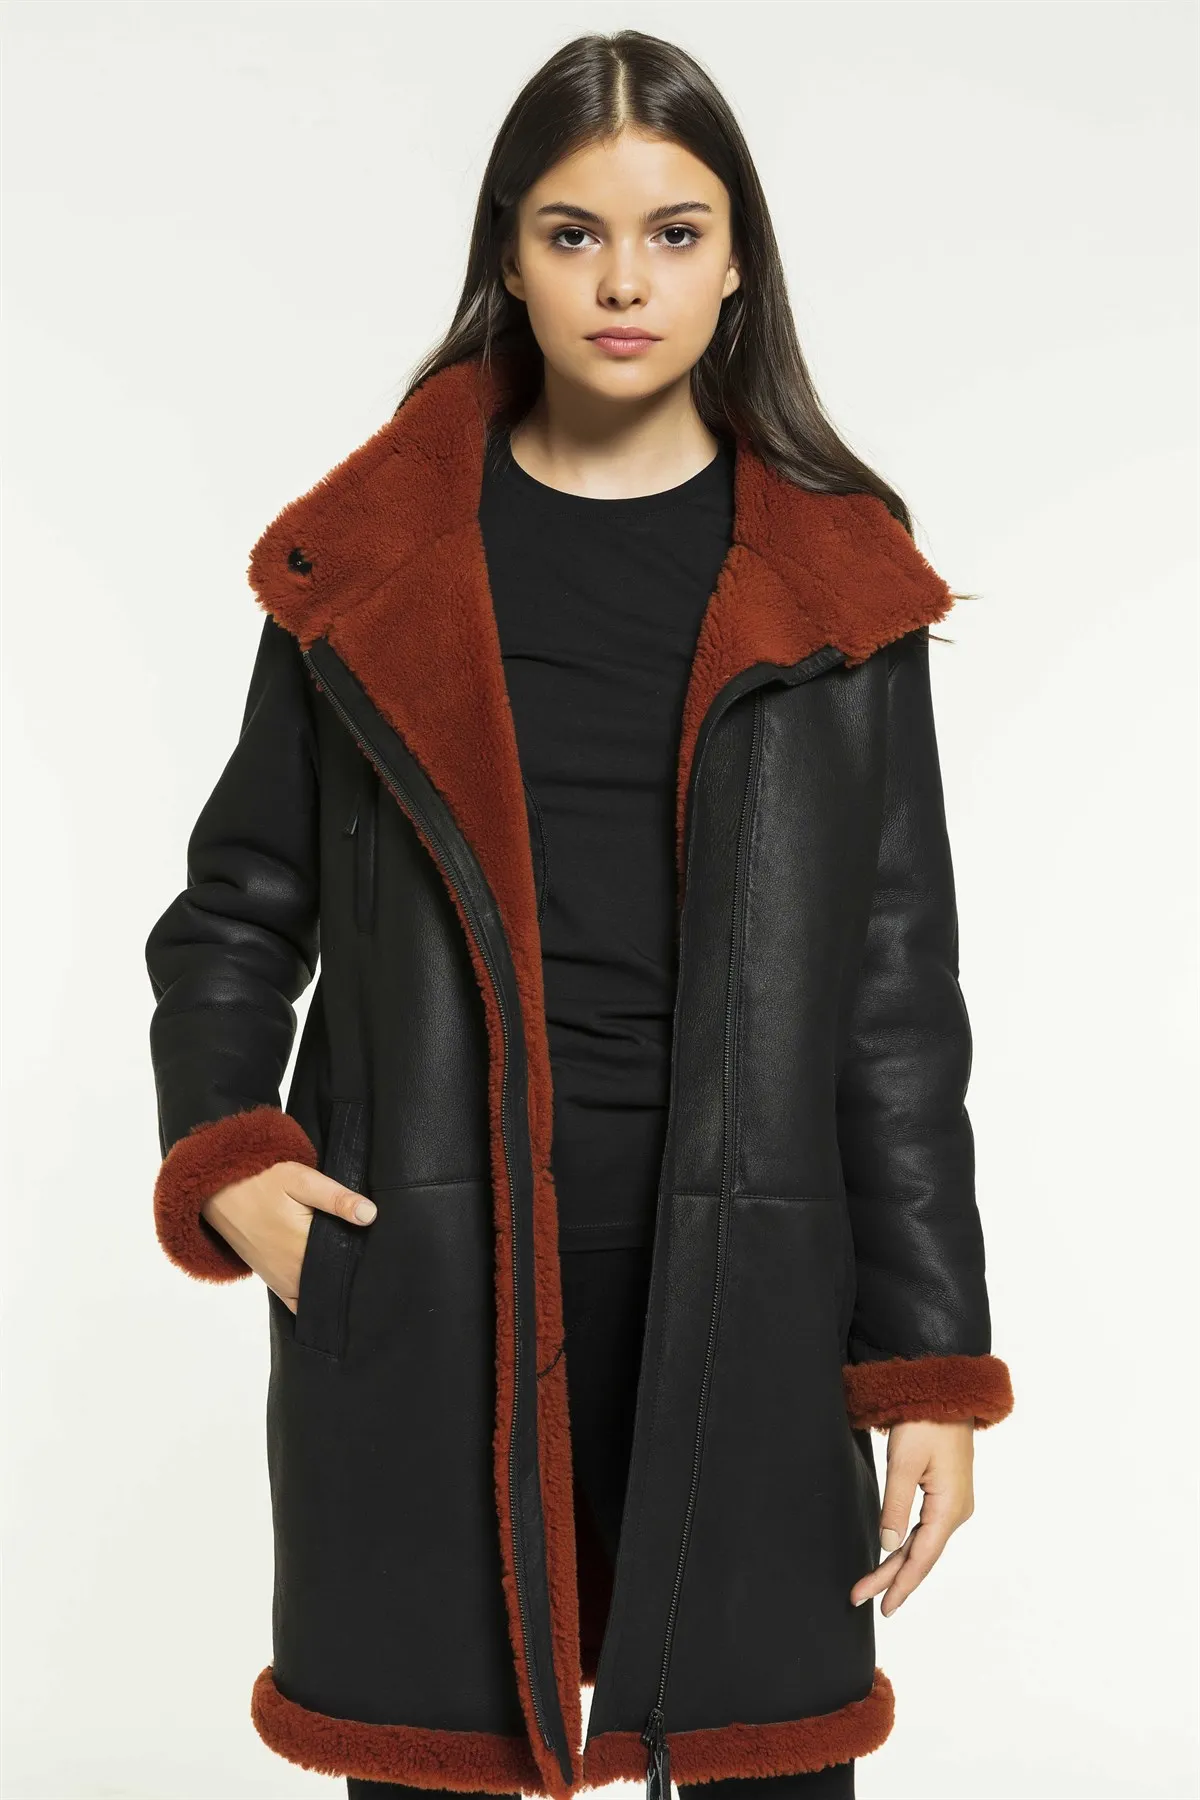 Women's Shearling Jackets Genuine Sheepskin And Fur Winter Warm Coats New Season Design Clothing Products Classic Black Color enlarge